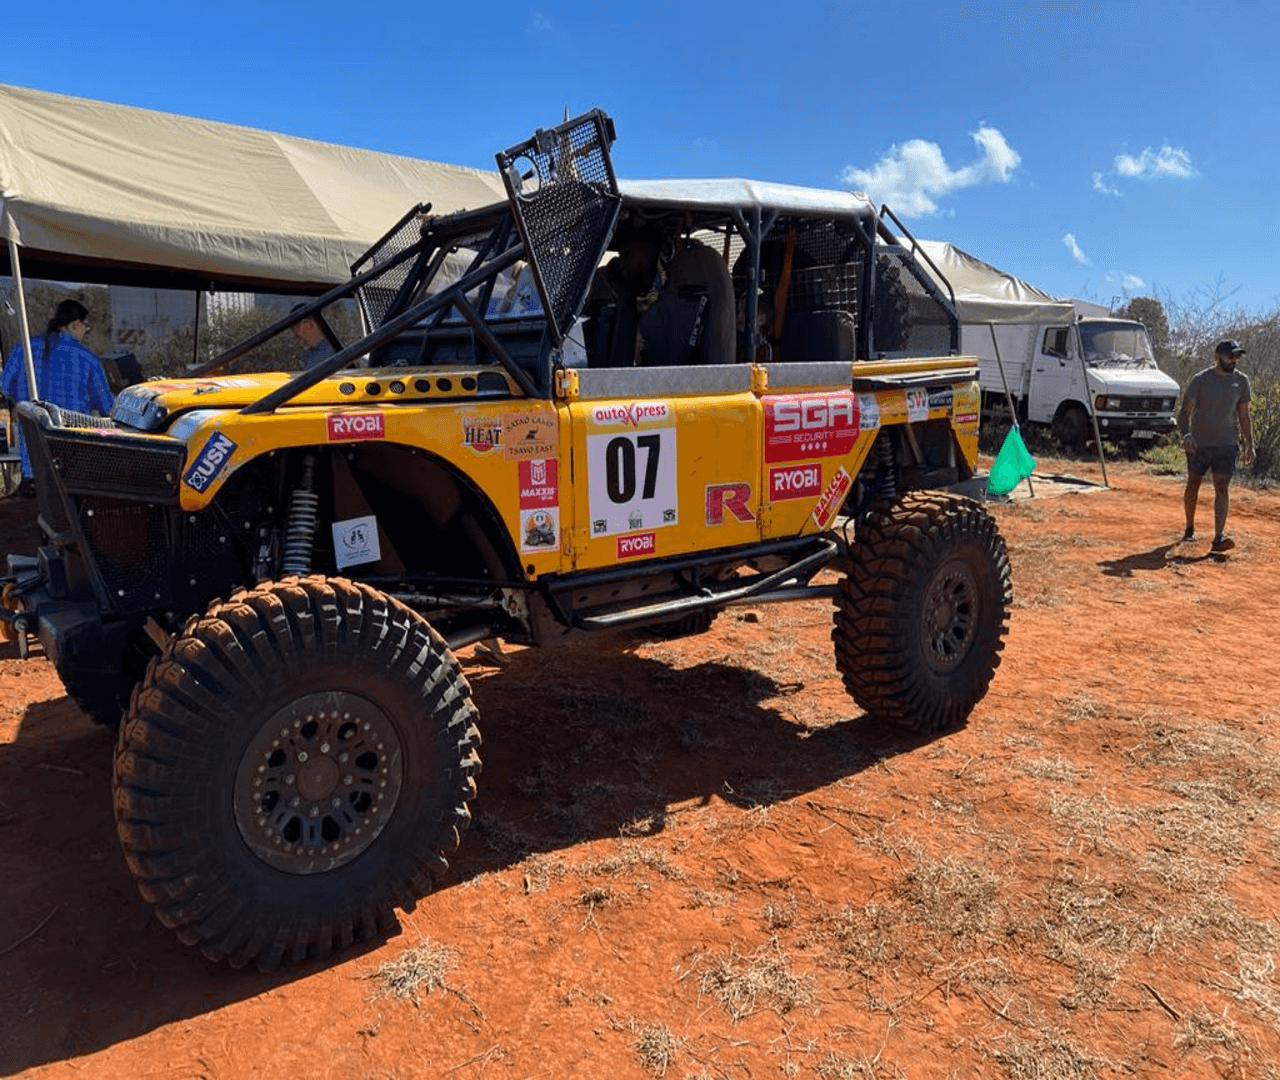  SGA Security has partnered with car no.7 for this year’s Rhino Charge competition in Kenya